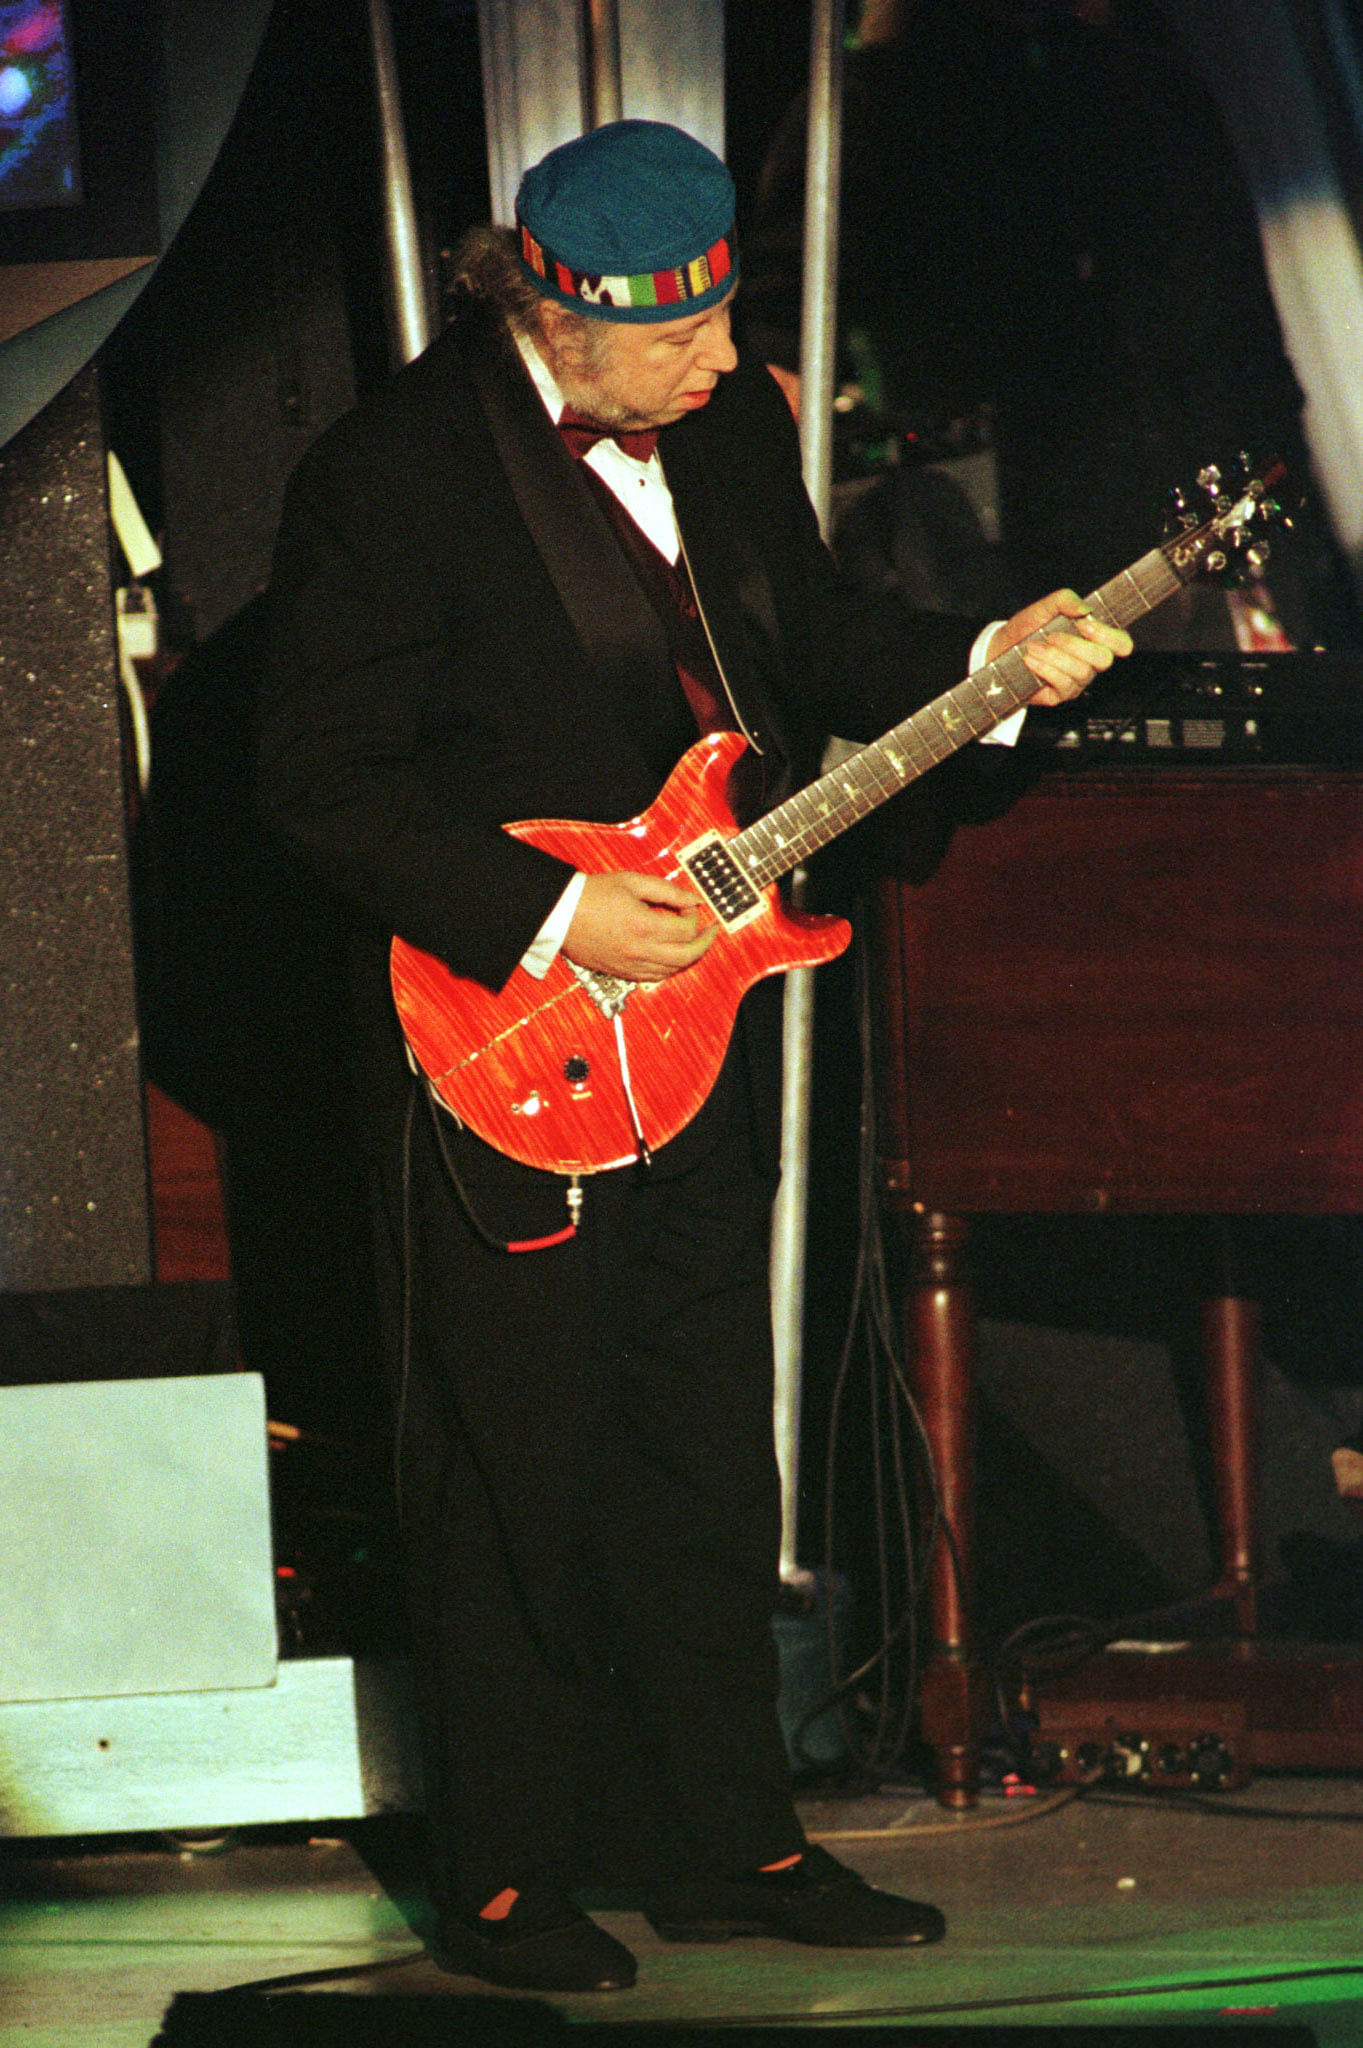 Rarely seen guitarist Peter Green, of the original Fleetwood Mac band, performs his original song "Black Magic Woman" with Carlos Santana (not seen) following Santana's induction into the Rock and Roll Hall of Fame at the Rock and Roll Hall of Fame Foundation's Thirteenth Annual Induction Dinner at New York's Waldorf Astoria Hotel, U.S., January 12, 1998. Credit: REUTERS File Photo